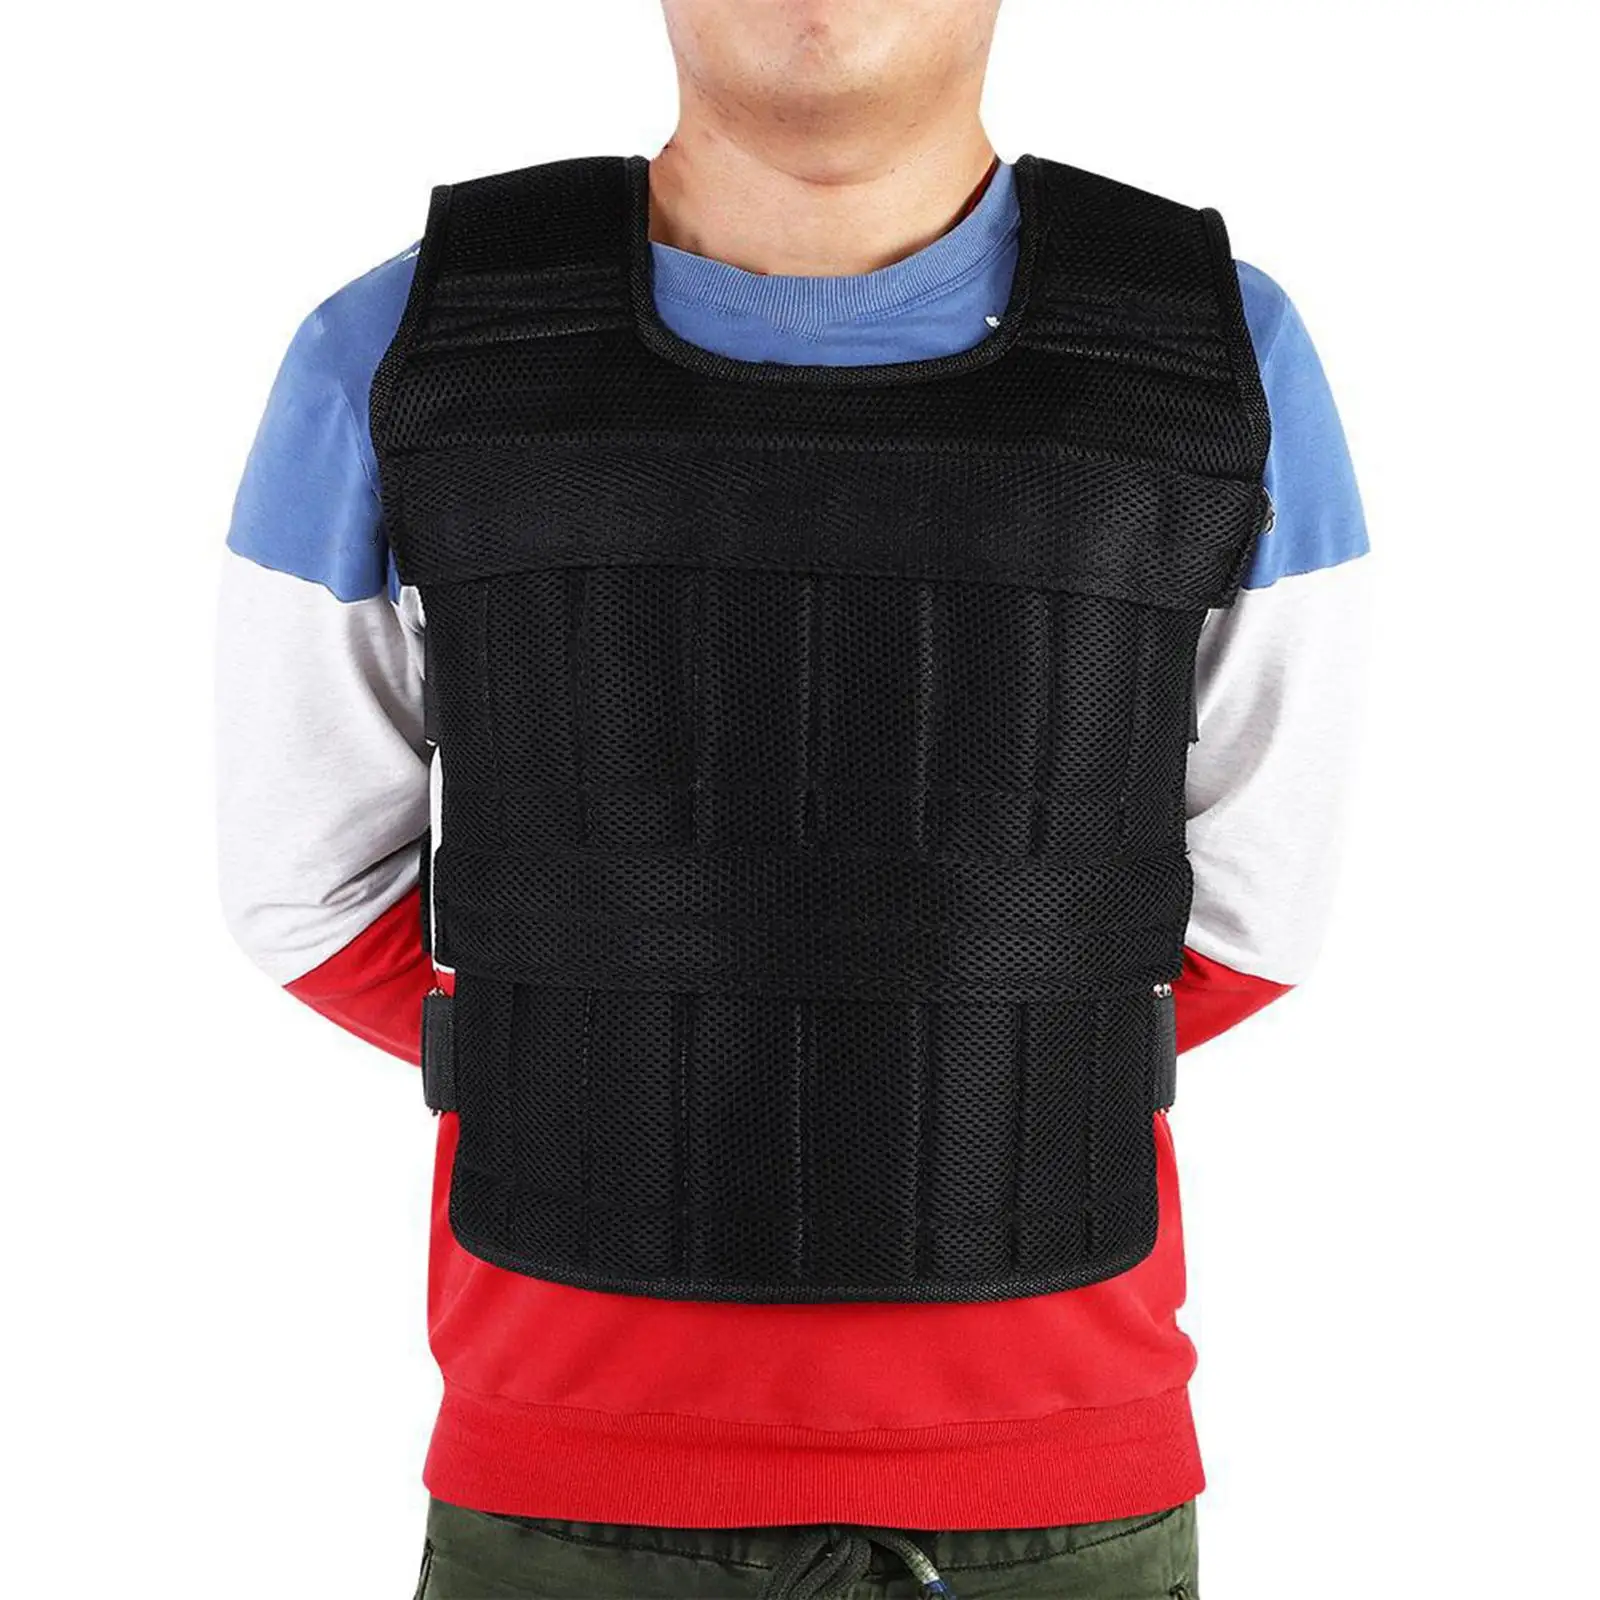 Professional Strength Training Weight Vests Soft Neoprene Durable Breathable weight vest for Exercise home,training Equipment